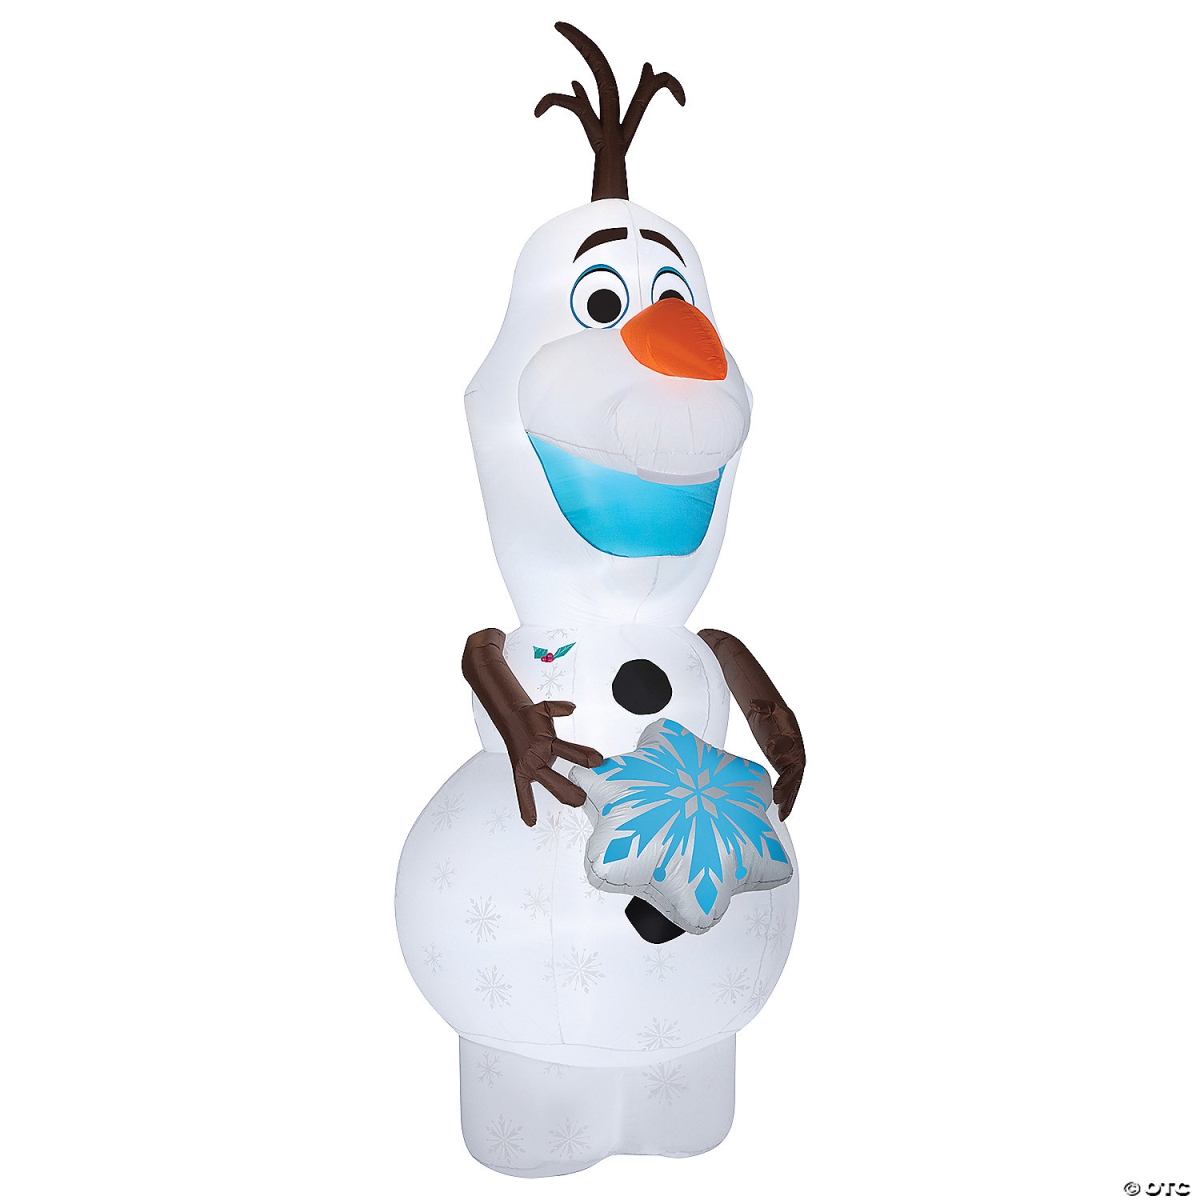 FunFlags 47 in. Airblown Disneys Frozen Olaf with Snowflake Inflatable Christmas Outdoor Yard Decor